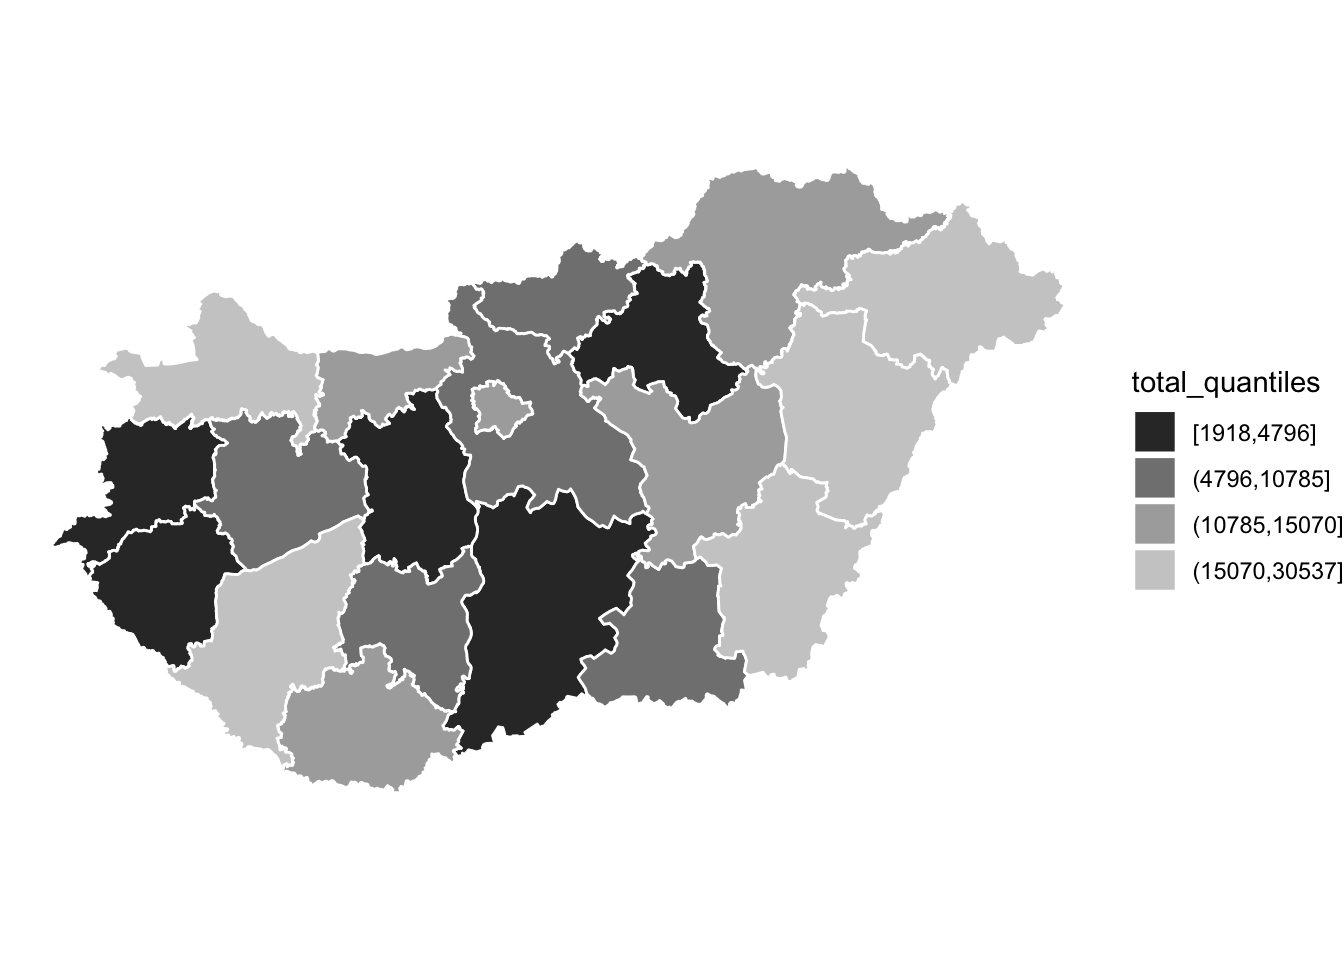 The previous map of Hungary and its counties, is now shaded in four shades of grey. The legend shows that the darkest grey corresponds to the smallest 'total quantiles'.